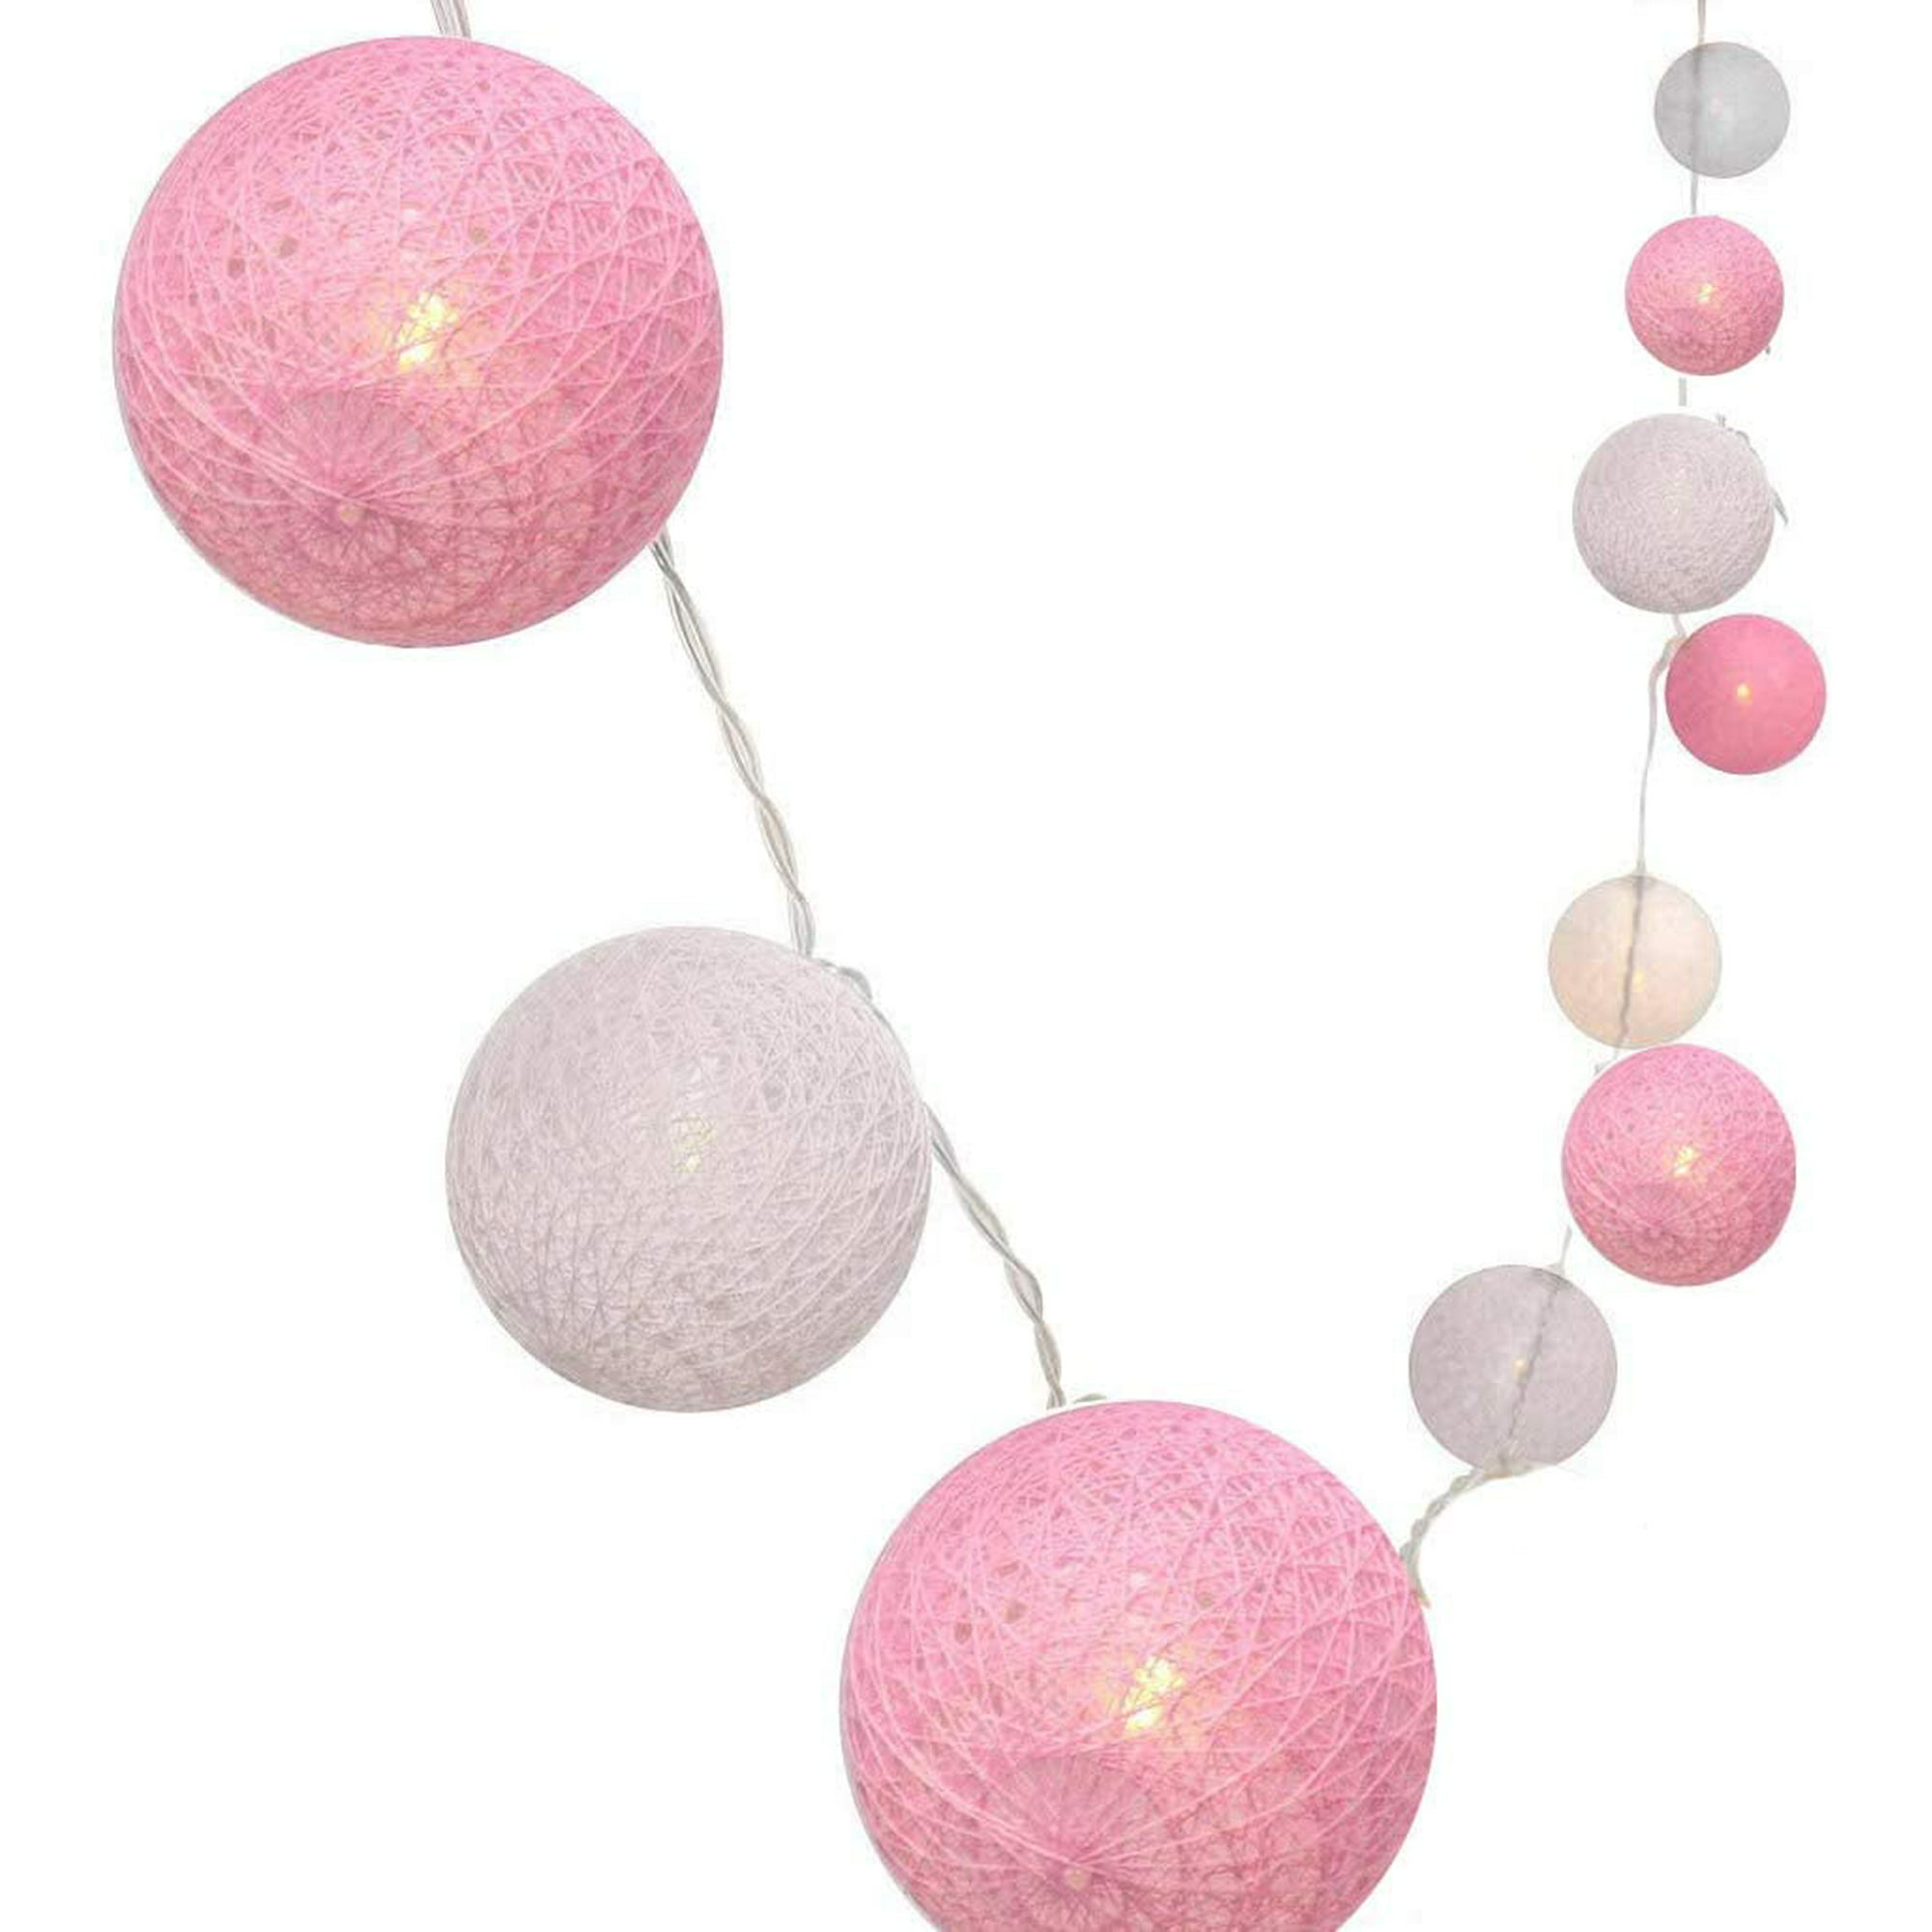 3m string light with 20 colorful LED balls - Battery operated, ideal for Christmas or a pink/white wedding, YERDGARY | Walmart Canada